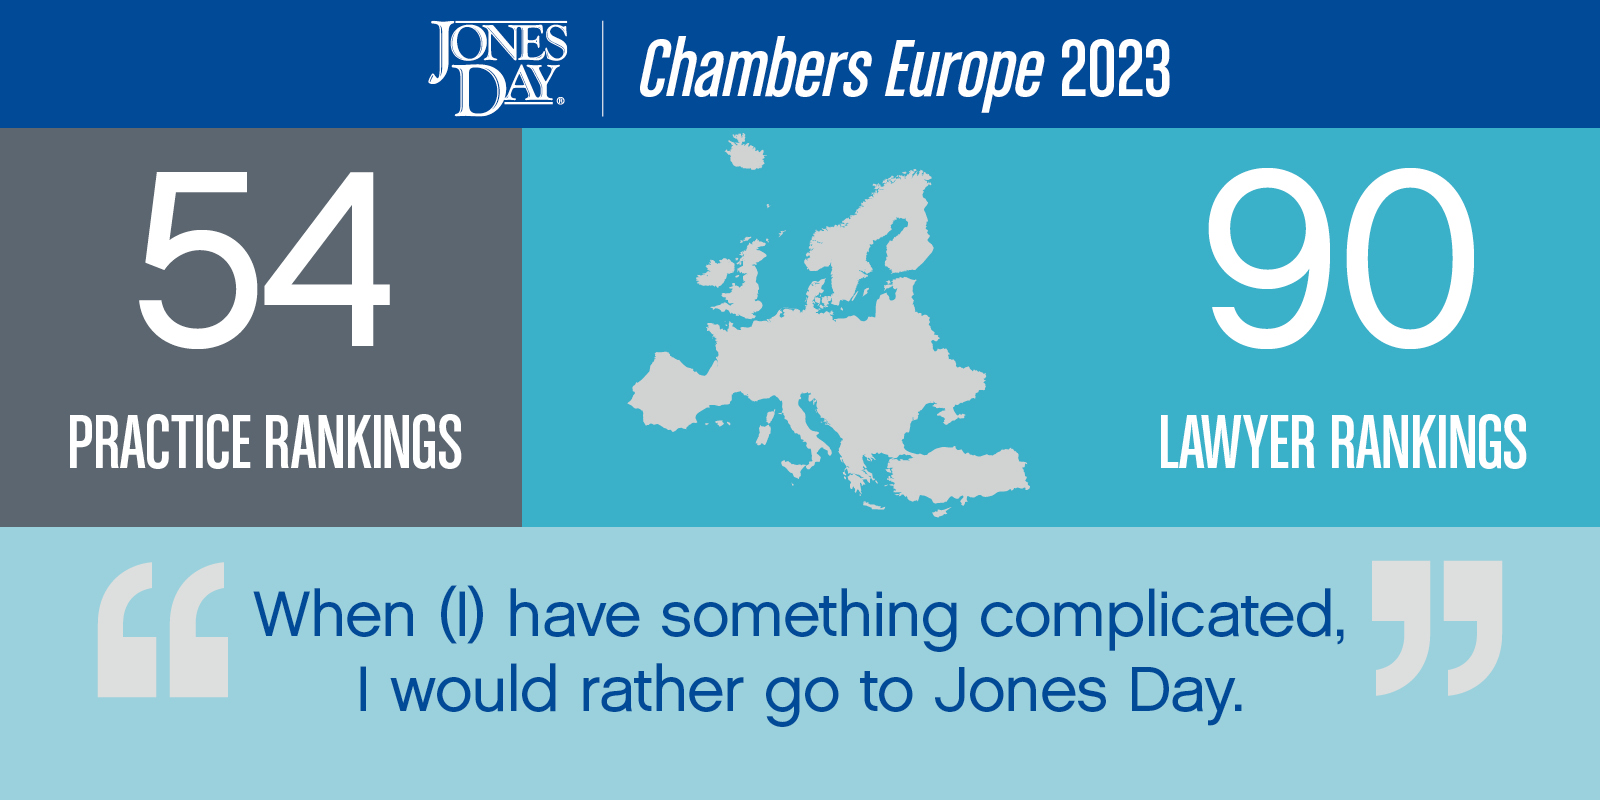 Chambers Europe Infographic_2023_SOCIAL